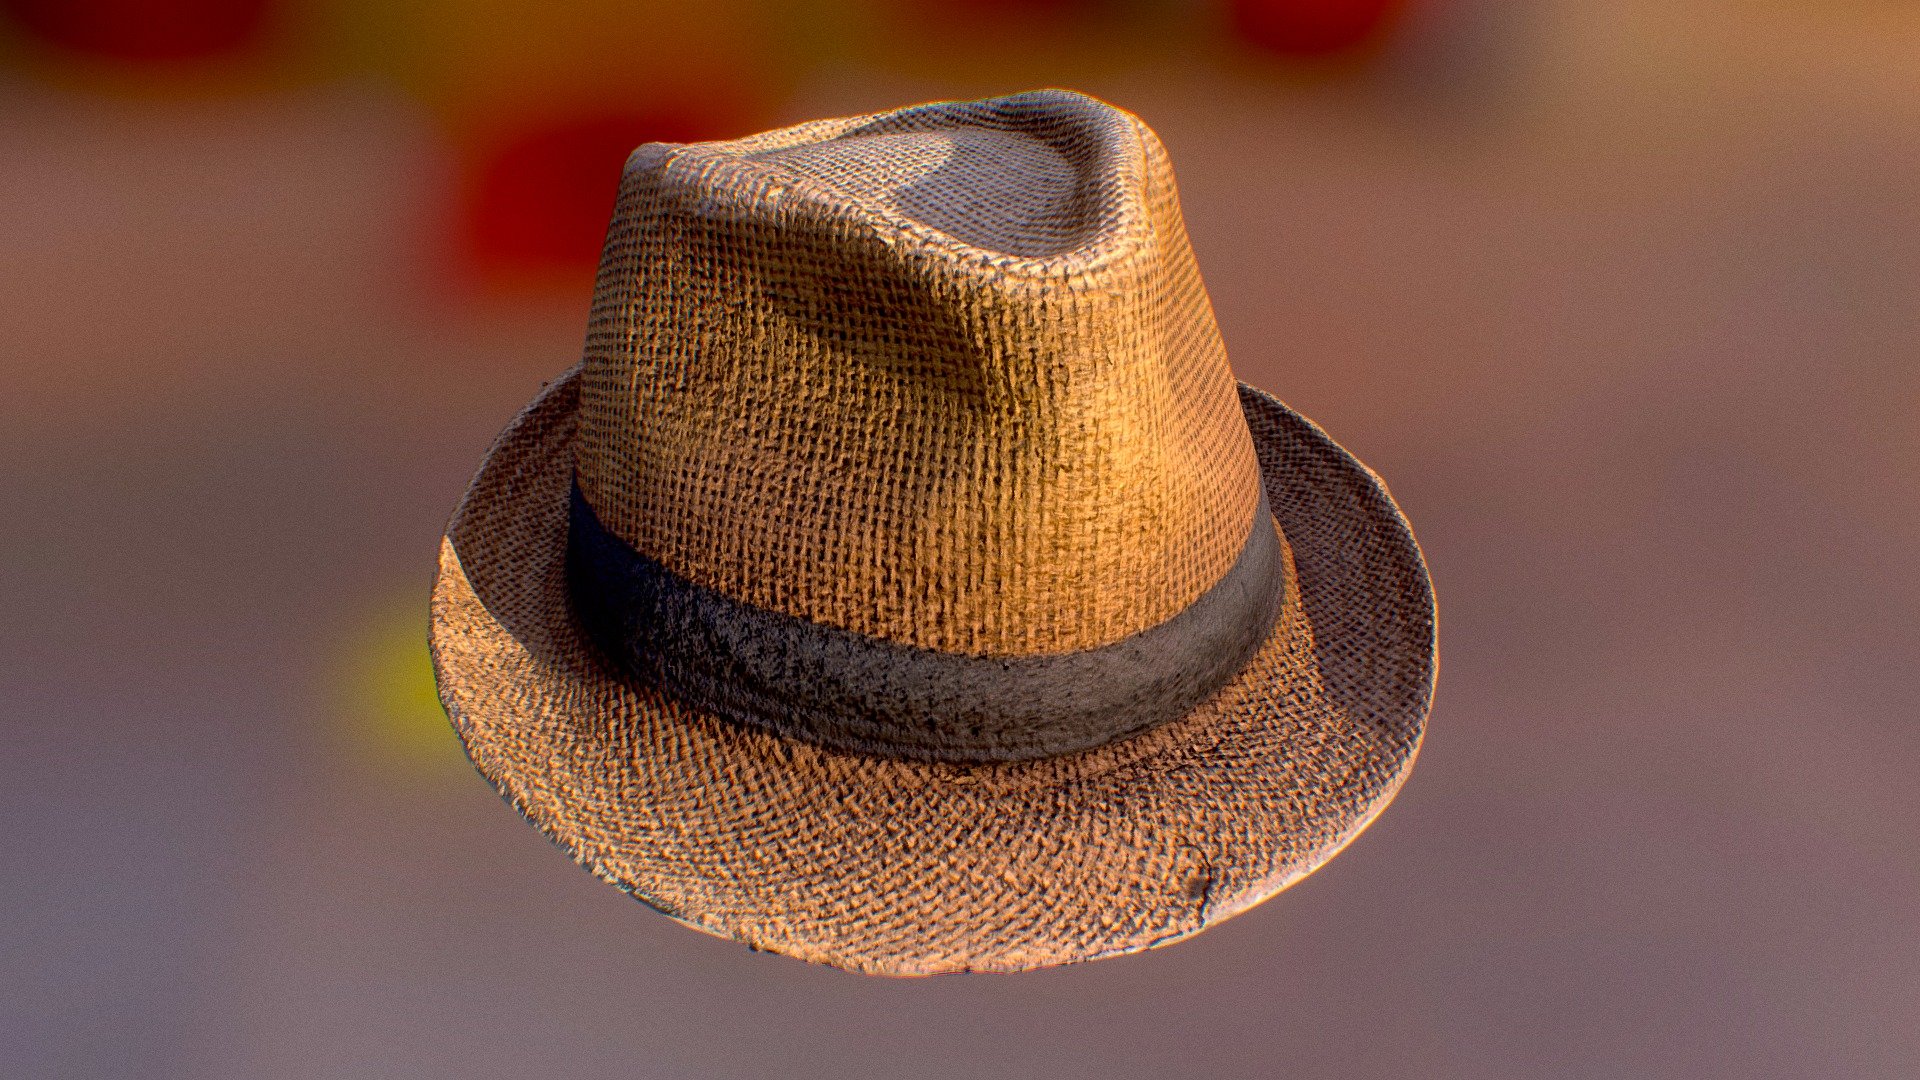 Photoscan of my colleague's legendary hat, he quits his job and I decided to scan his signature hat as a keepsake.

Сleaned and optimized in Blender. Scan made in reality capture with 80 photos. Texture cleaned in Substance painter

day 3 scan i try to support @alban idea and follow the tag #1scanaday - Straw hat - 3D model by truekit 3d model